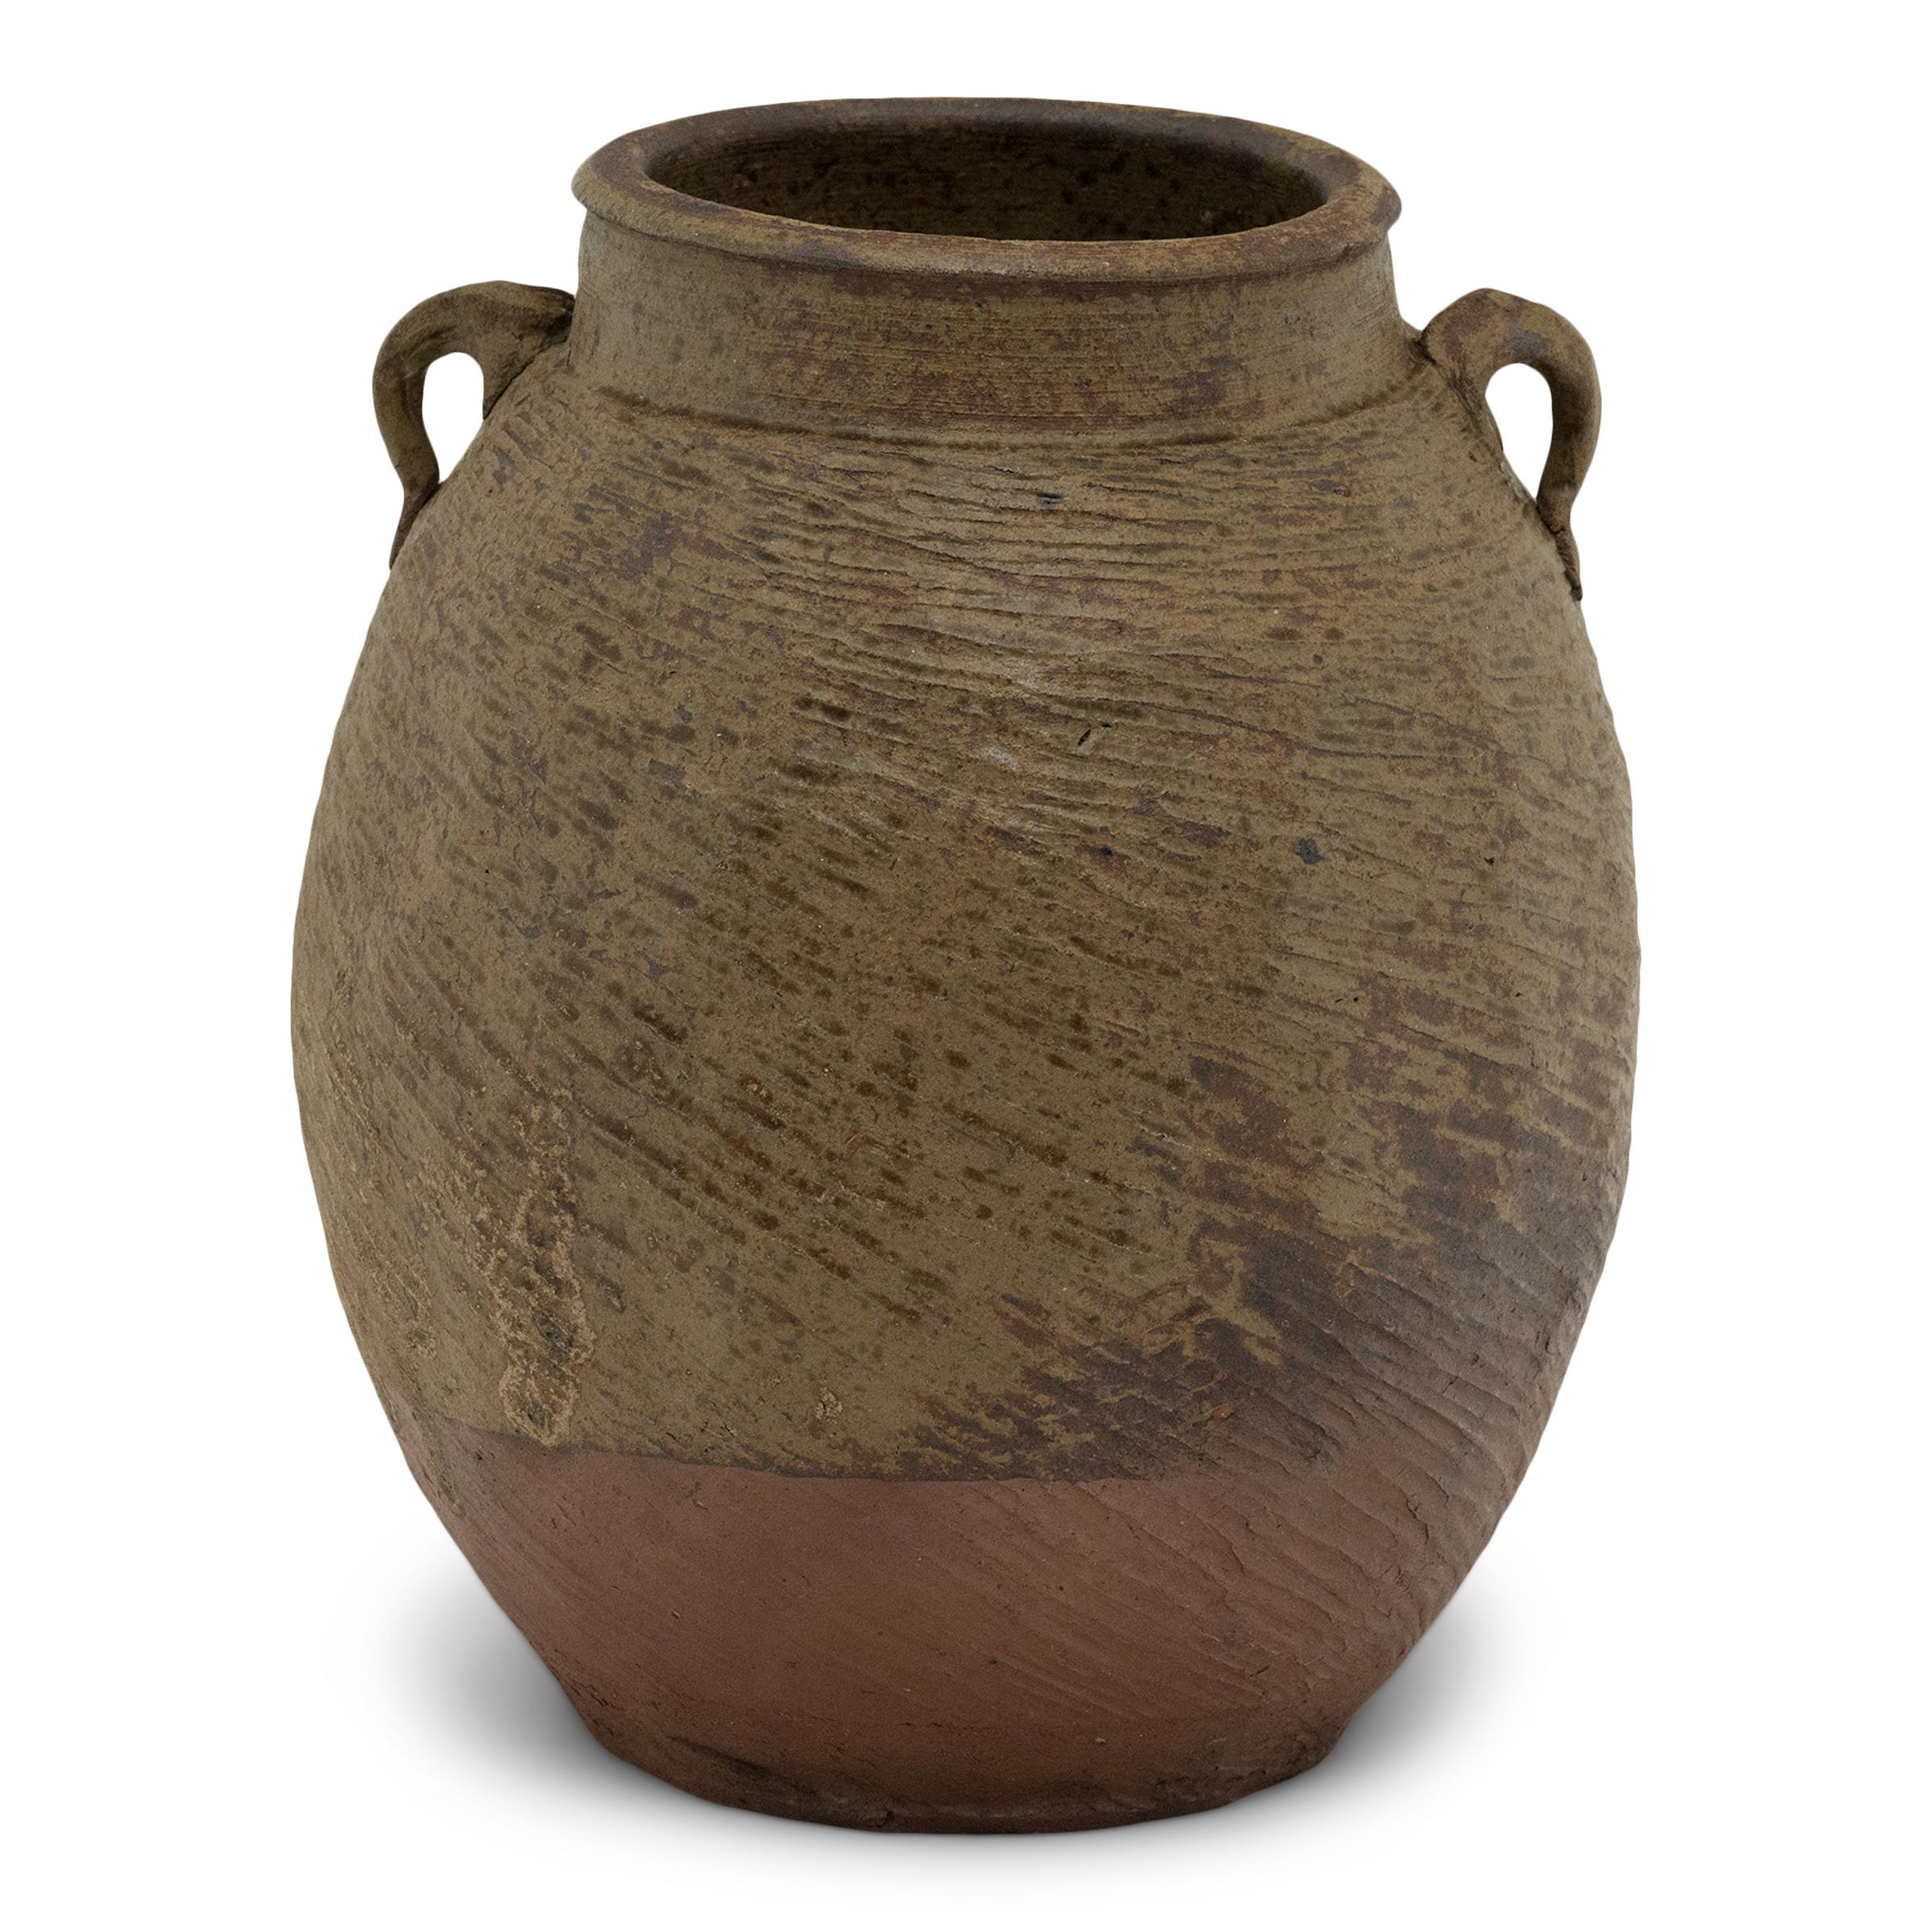 Charged with the humble task of storing dry goods, this small terracotta pot was hand-shaped in the 19th century with balanced proportions and a beautifully irregular brown-green slip finish. The lobed pot features a round form with a narrow base